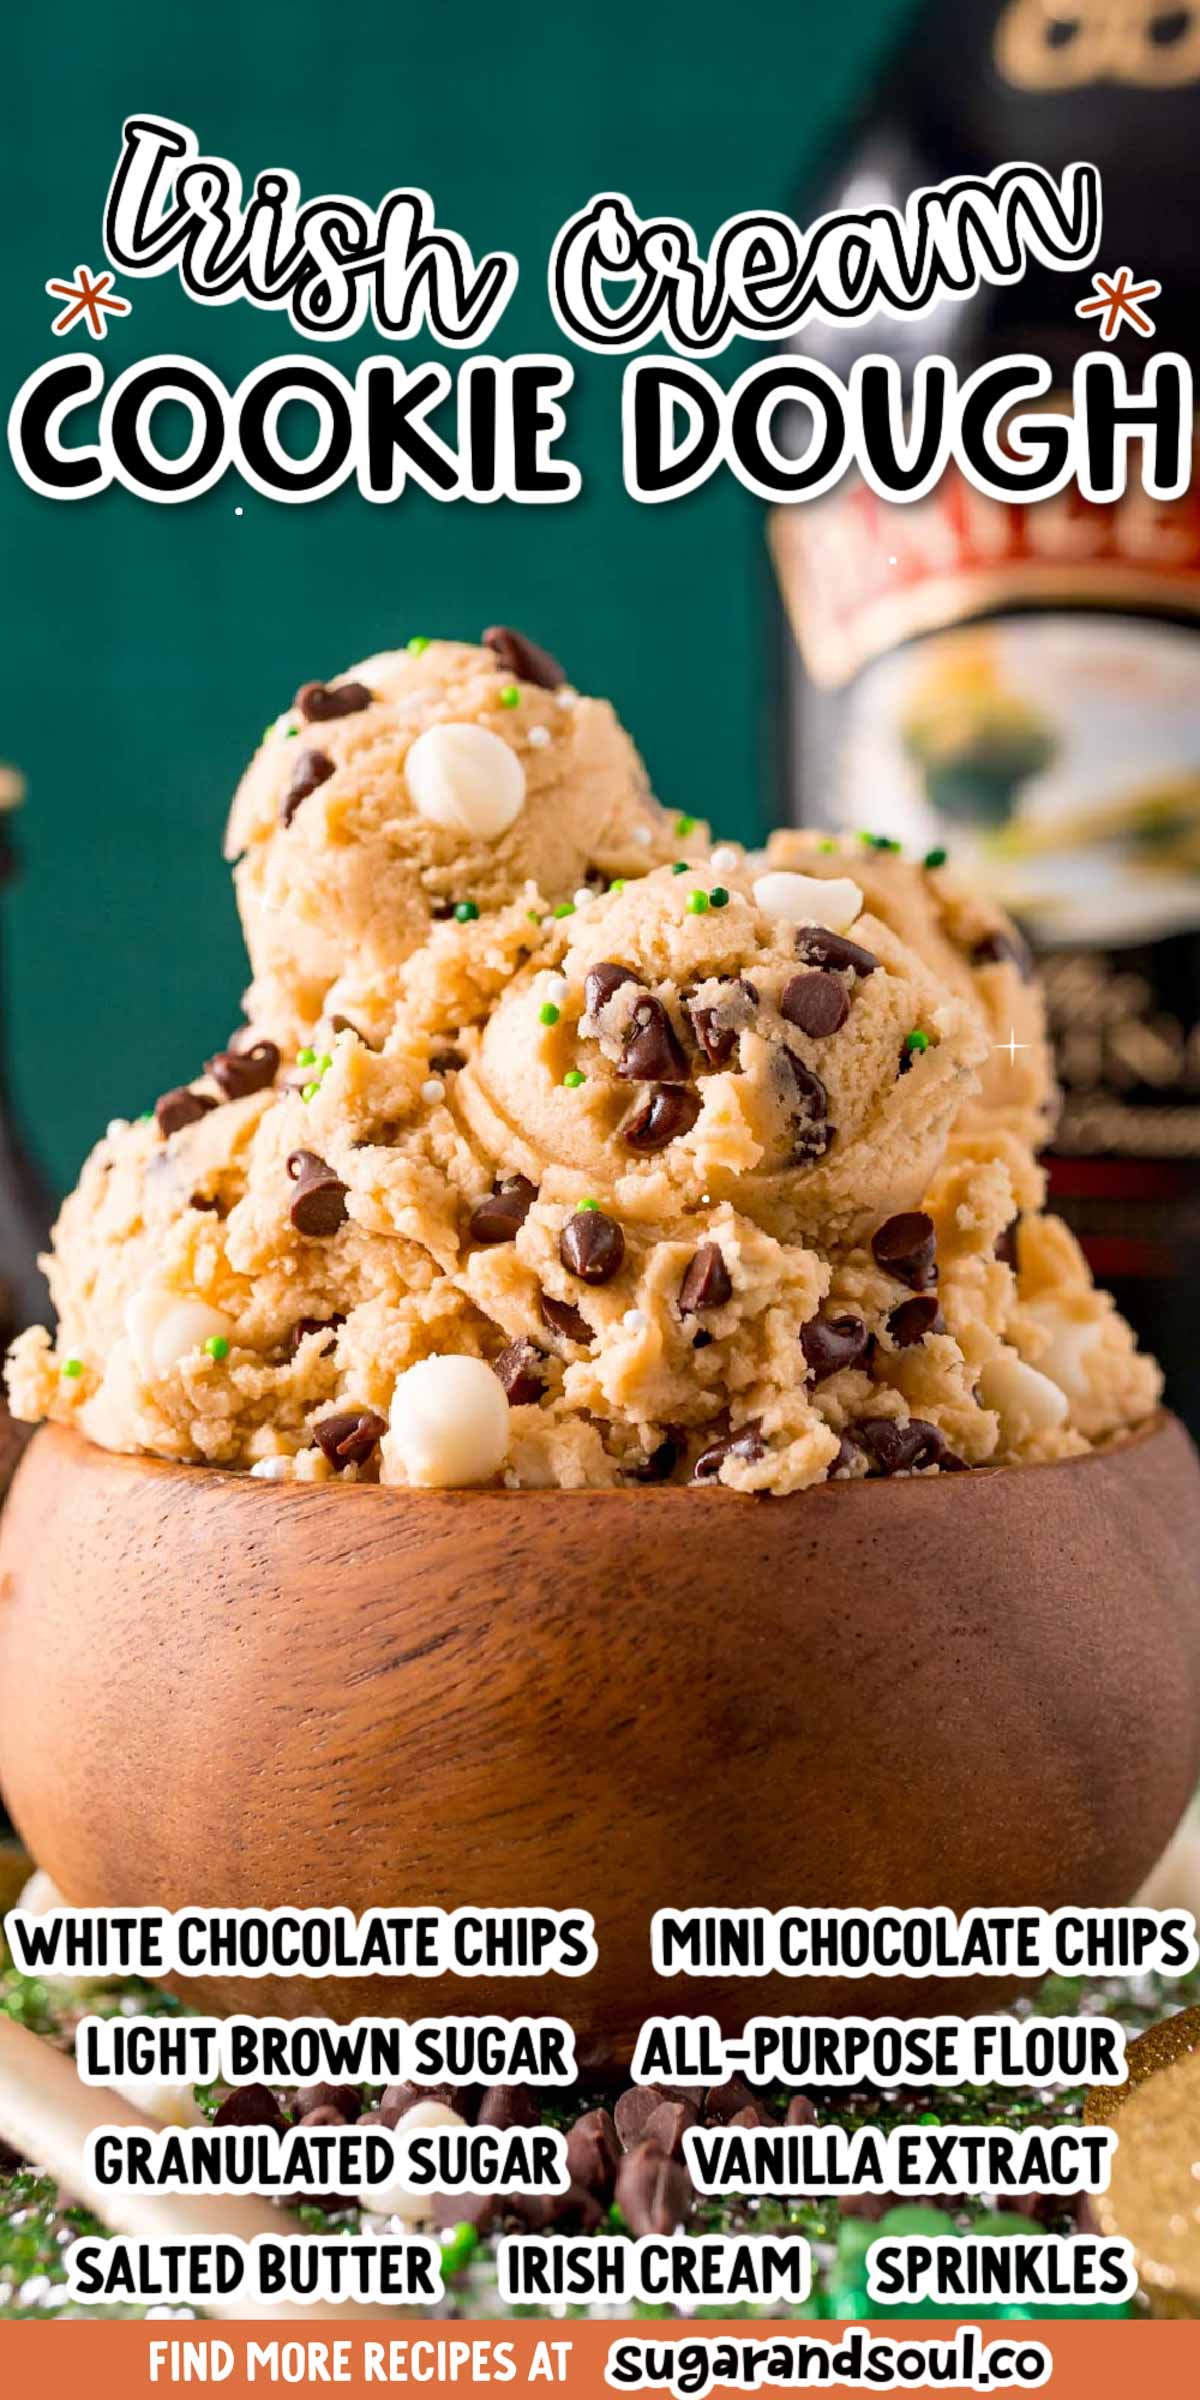 Irish Cream Edible Cookie Dough is an easy-to-make eggless treat that's made with Irish cream, chocolate chips, and a few pantry staple ingredients! A sweet dessert that's perfect for St. Patrick's Day! via @sugarandsoulco